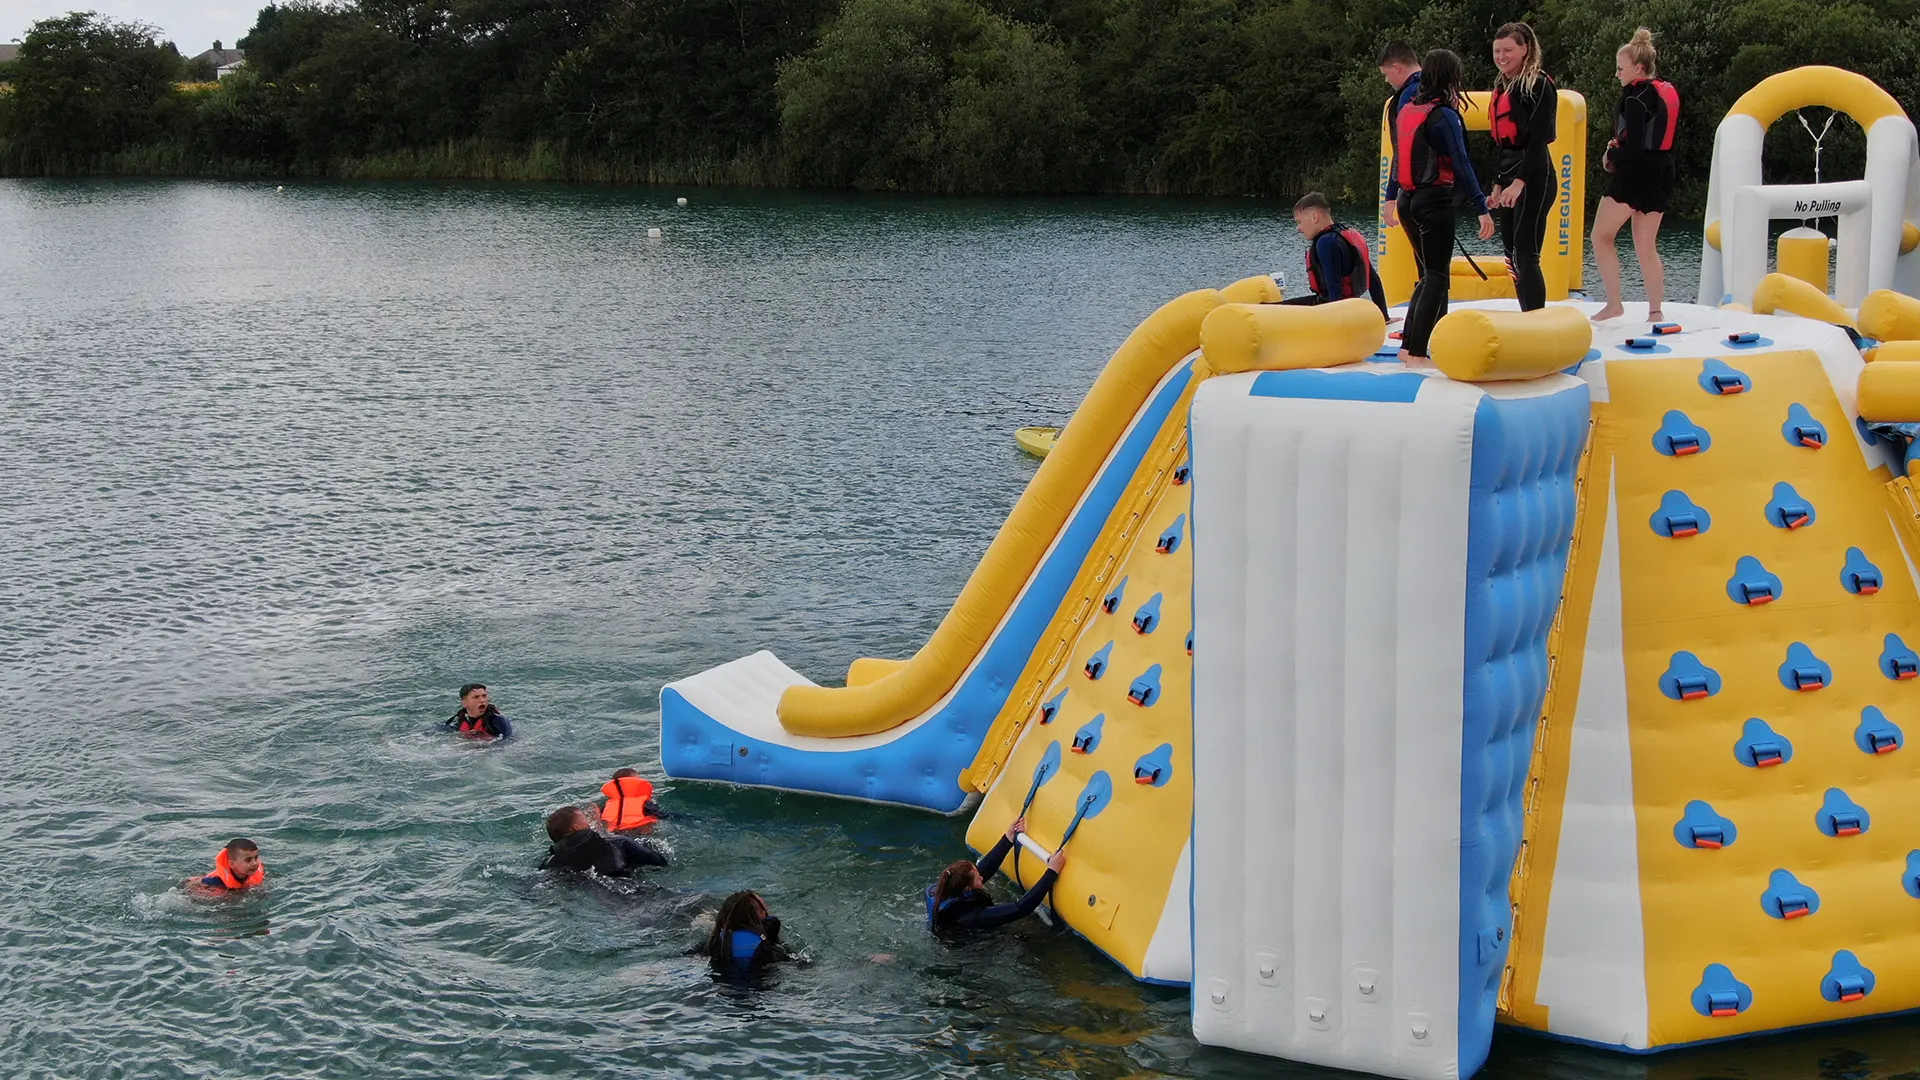 People in the water by the side of the inflatable high jump